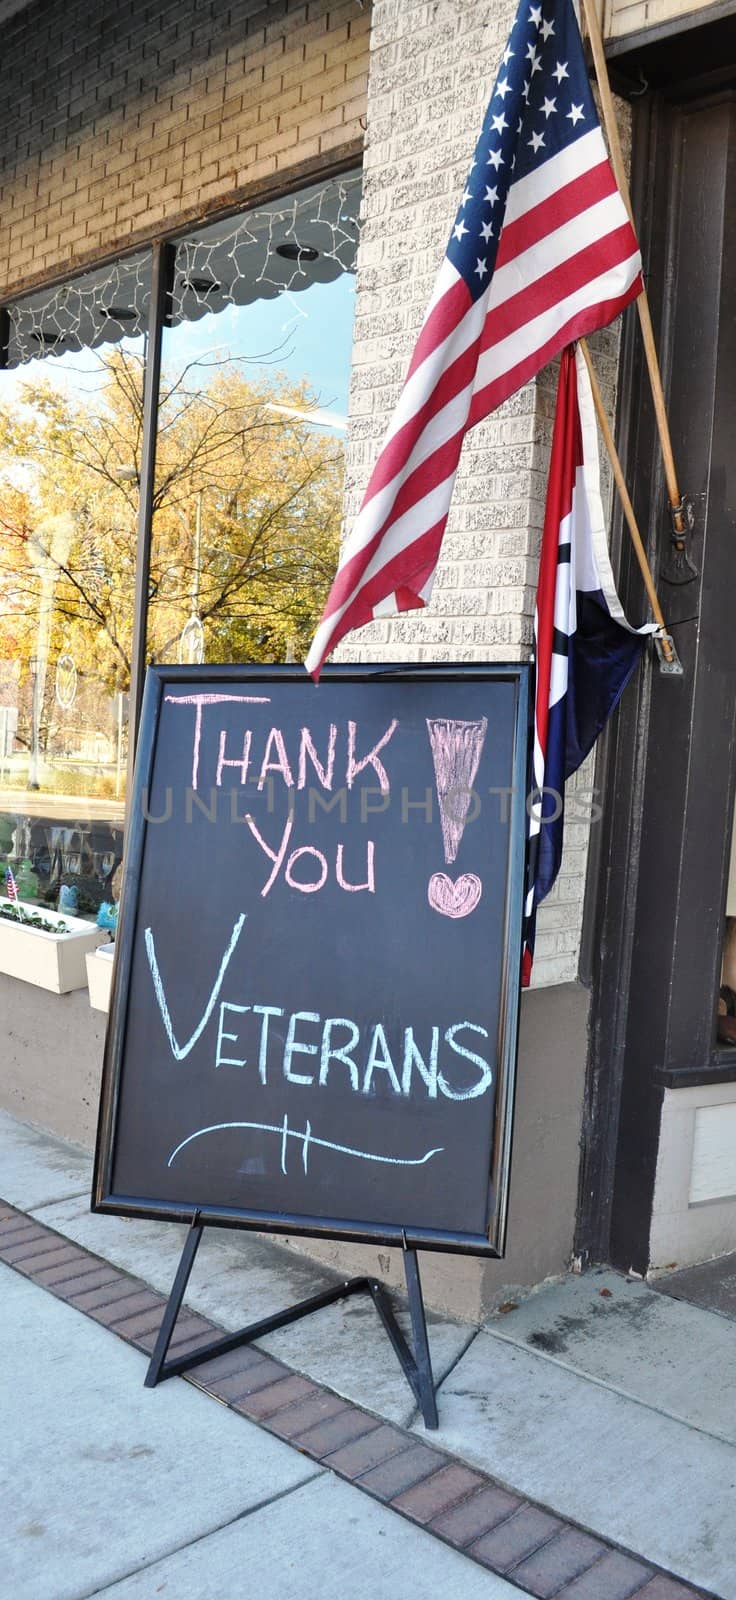 Thank You Veterans Sign and flag